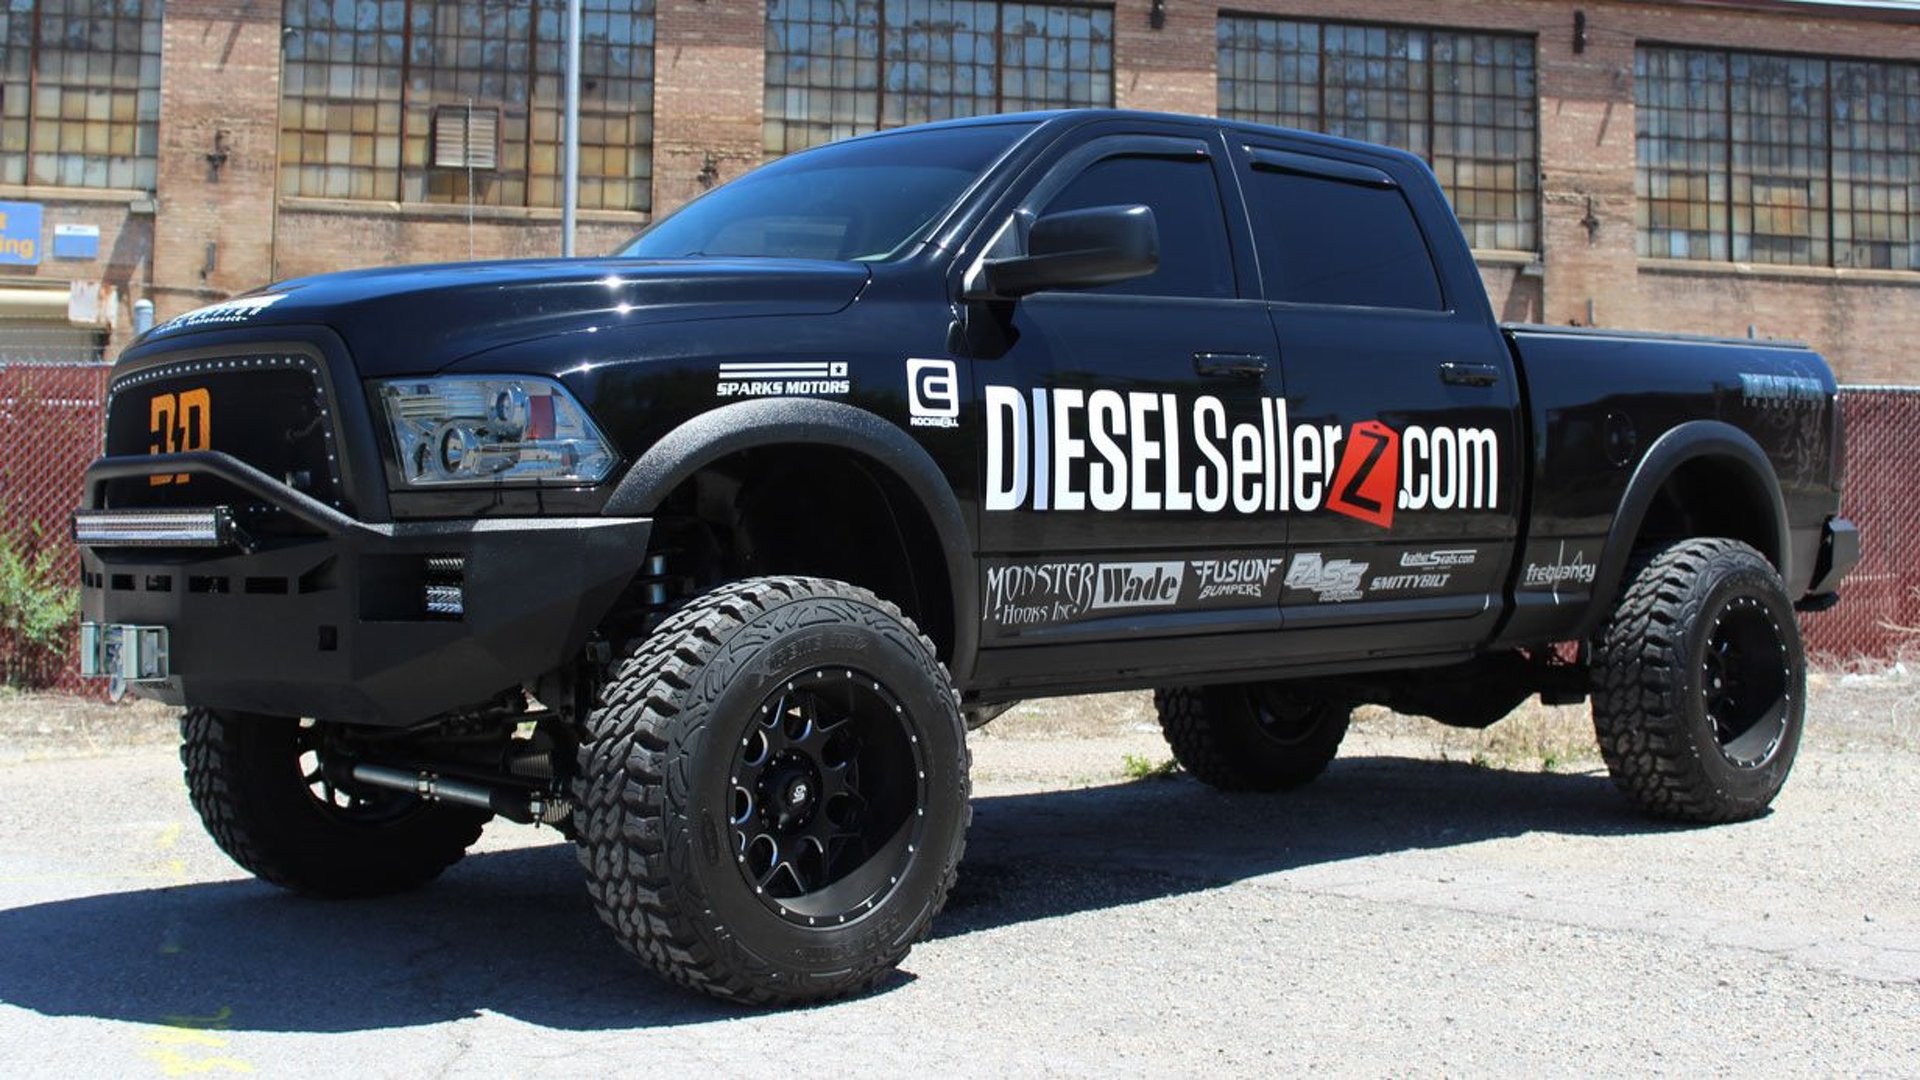 Diesel Brothers being sued over health effects of modified trucks